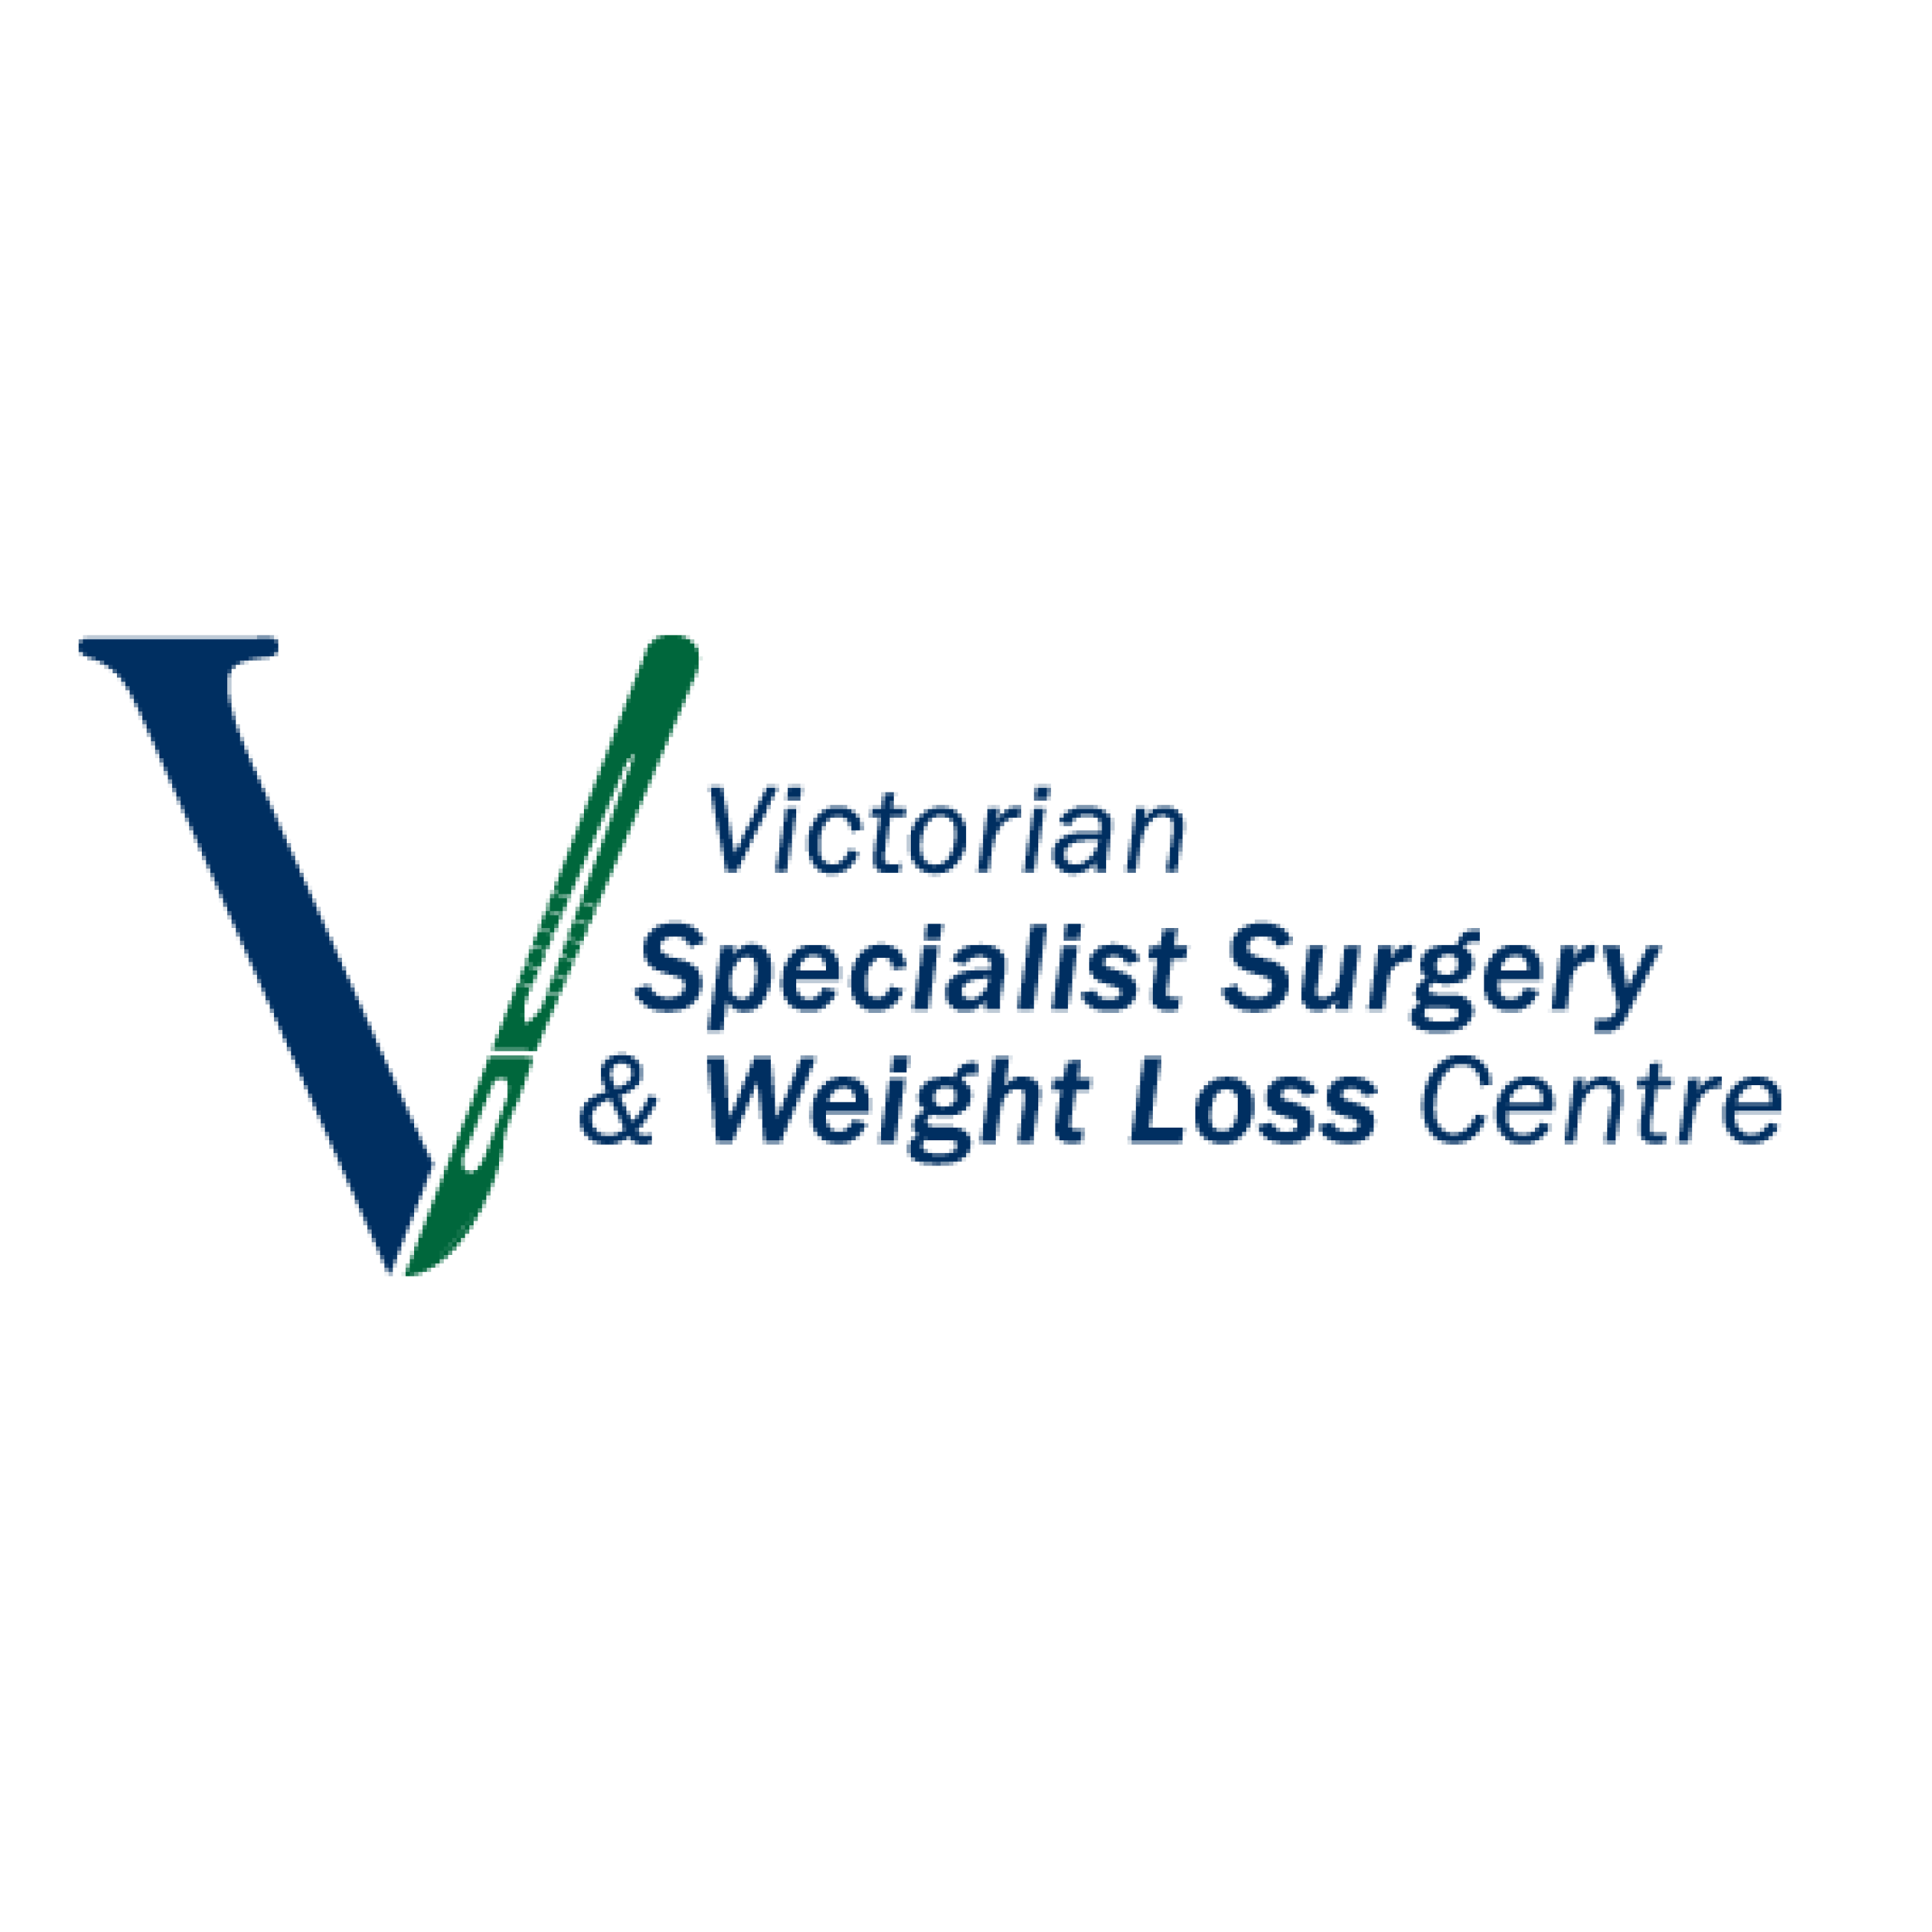 Victorian Specialist Surgery & Weight Loss Centre